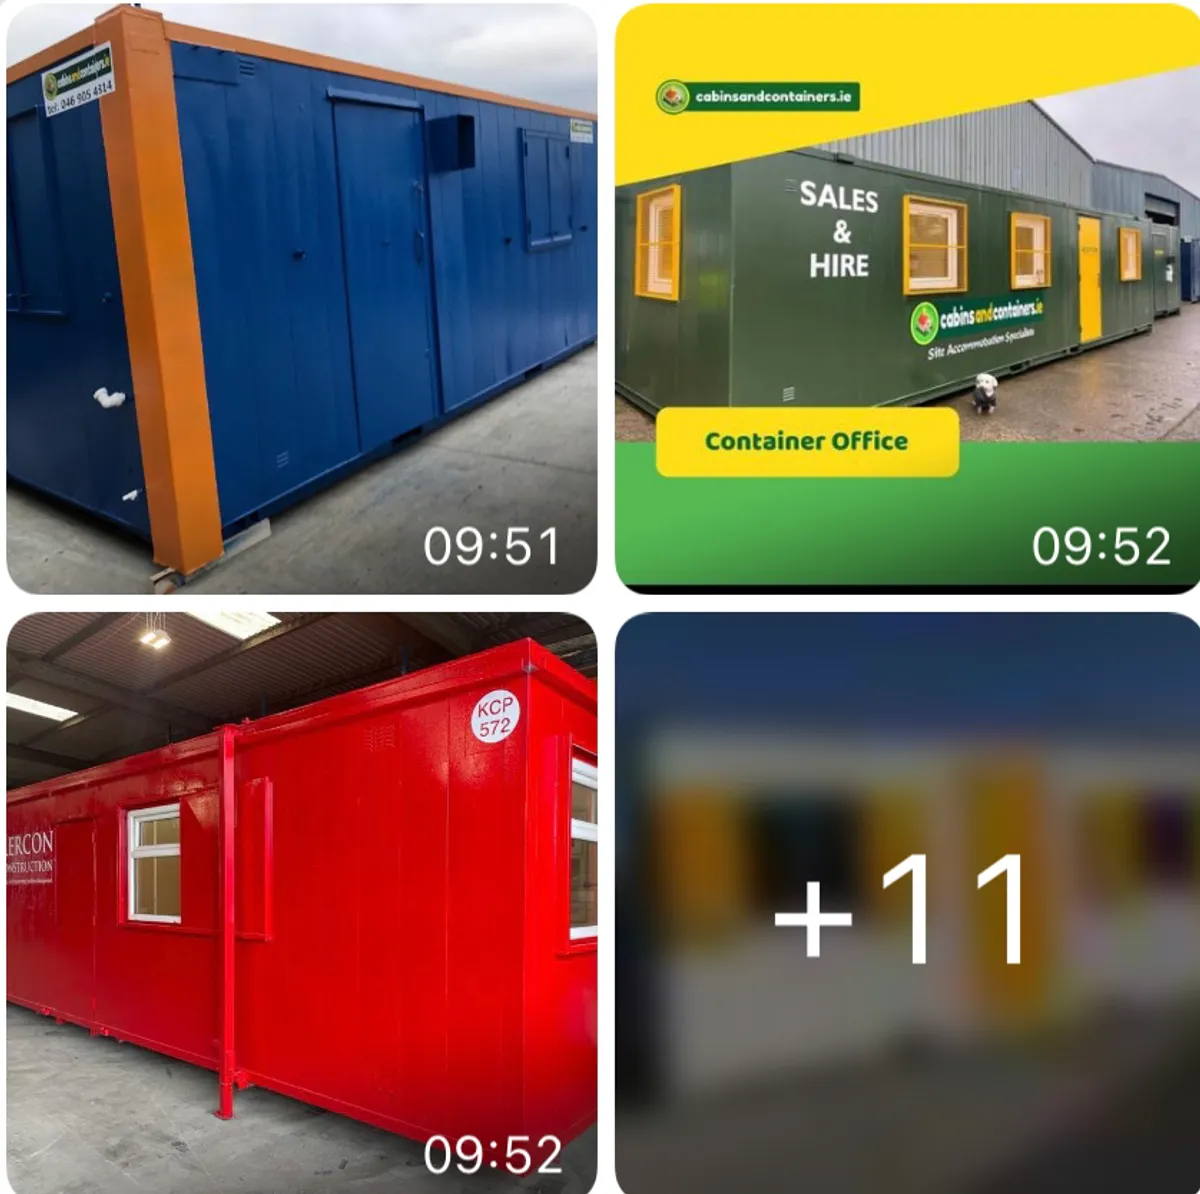 Cabins and containers,what's your colour?? - Image 1